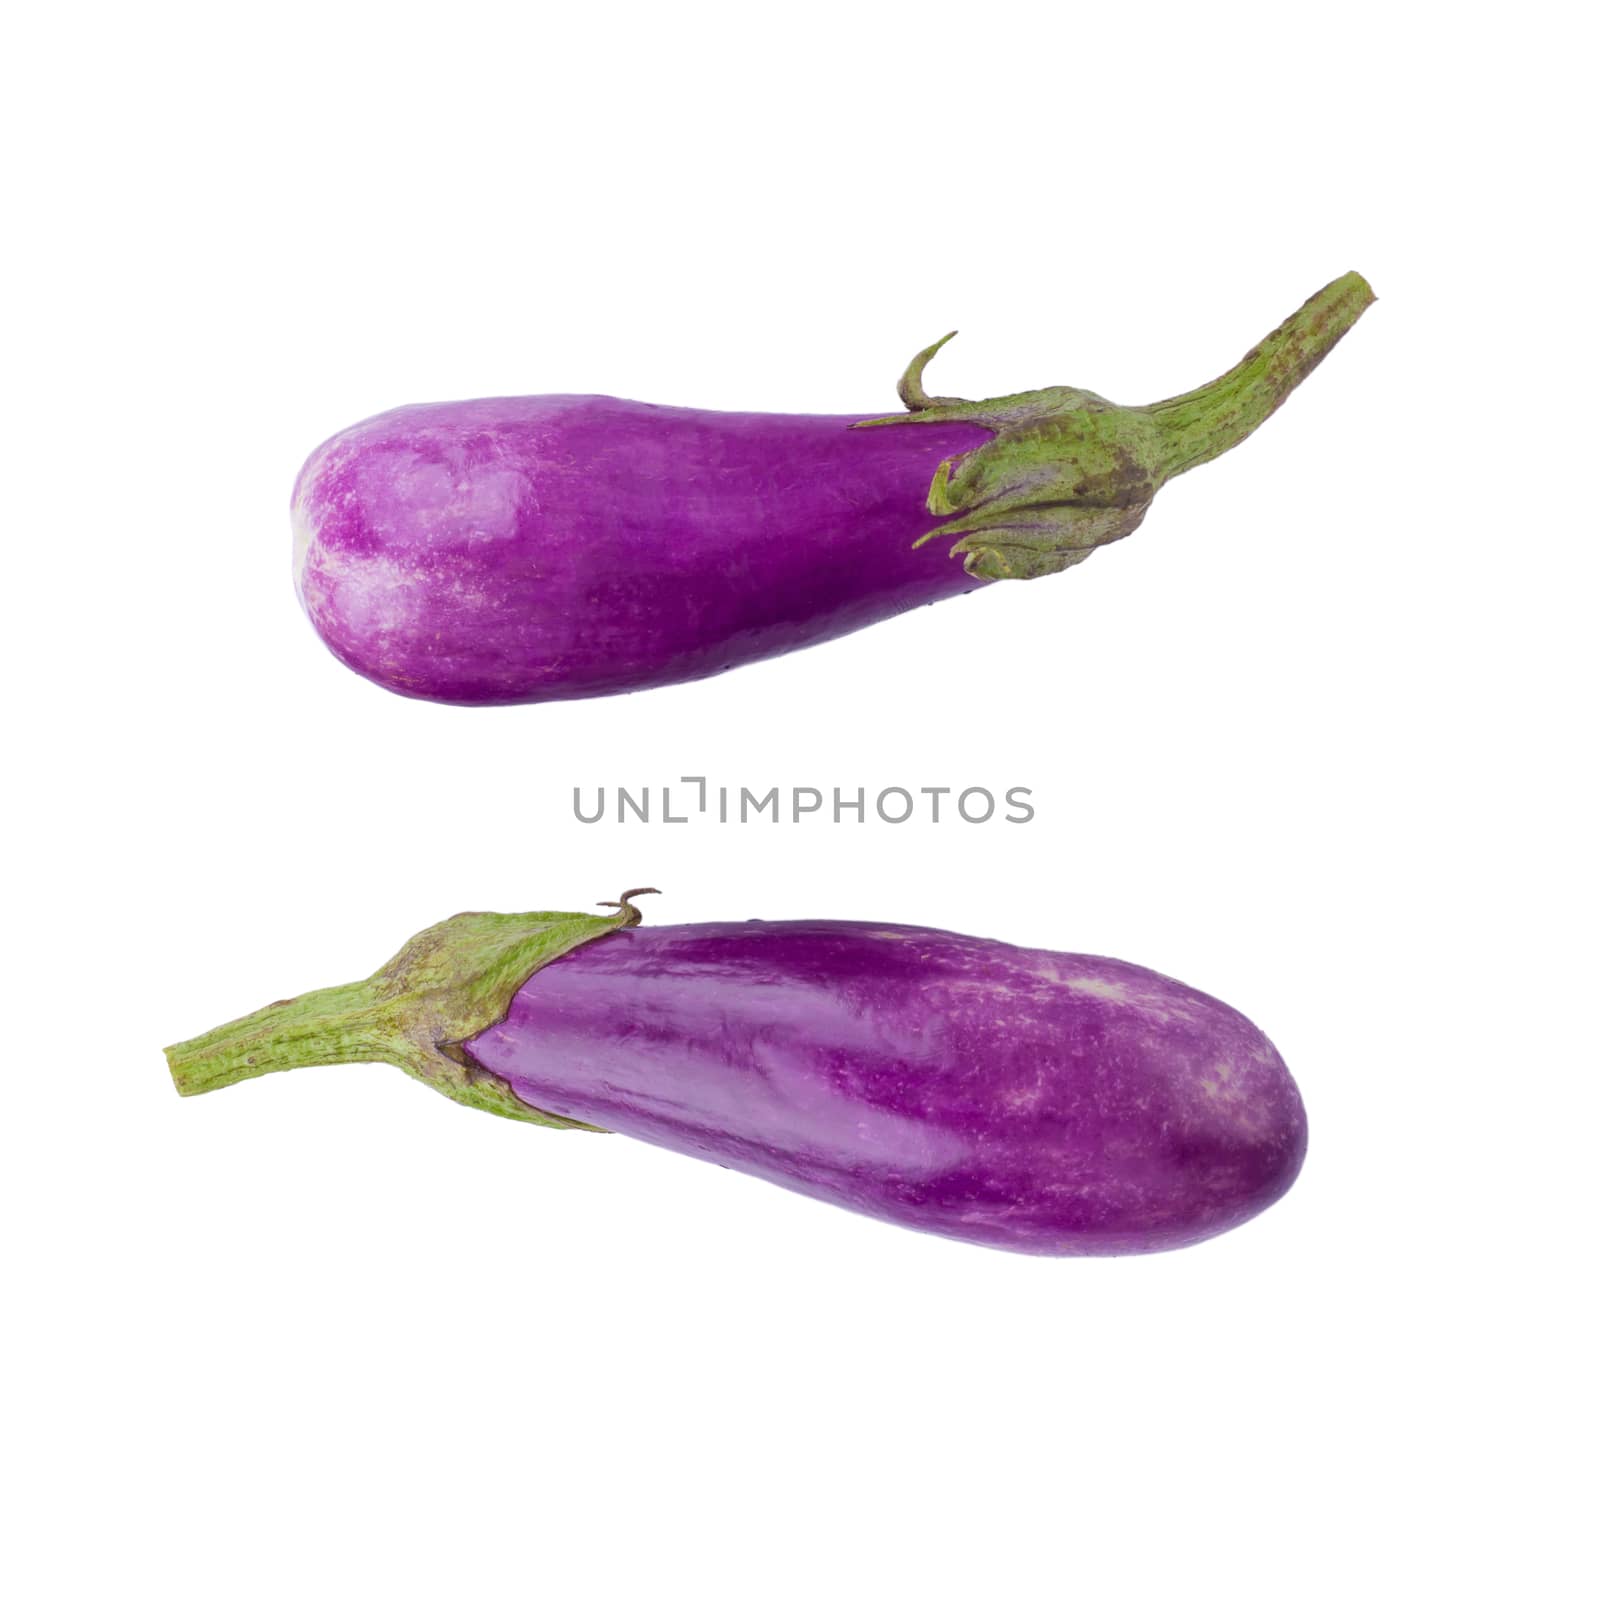 Eggplant or aubergine vegetable isolated on white background by kaiskynet